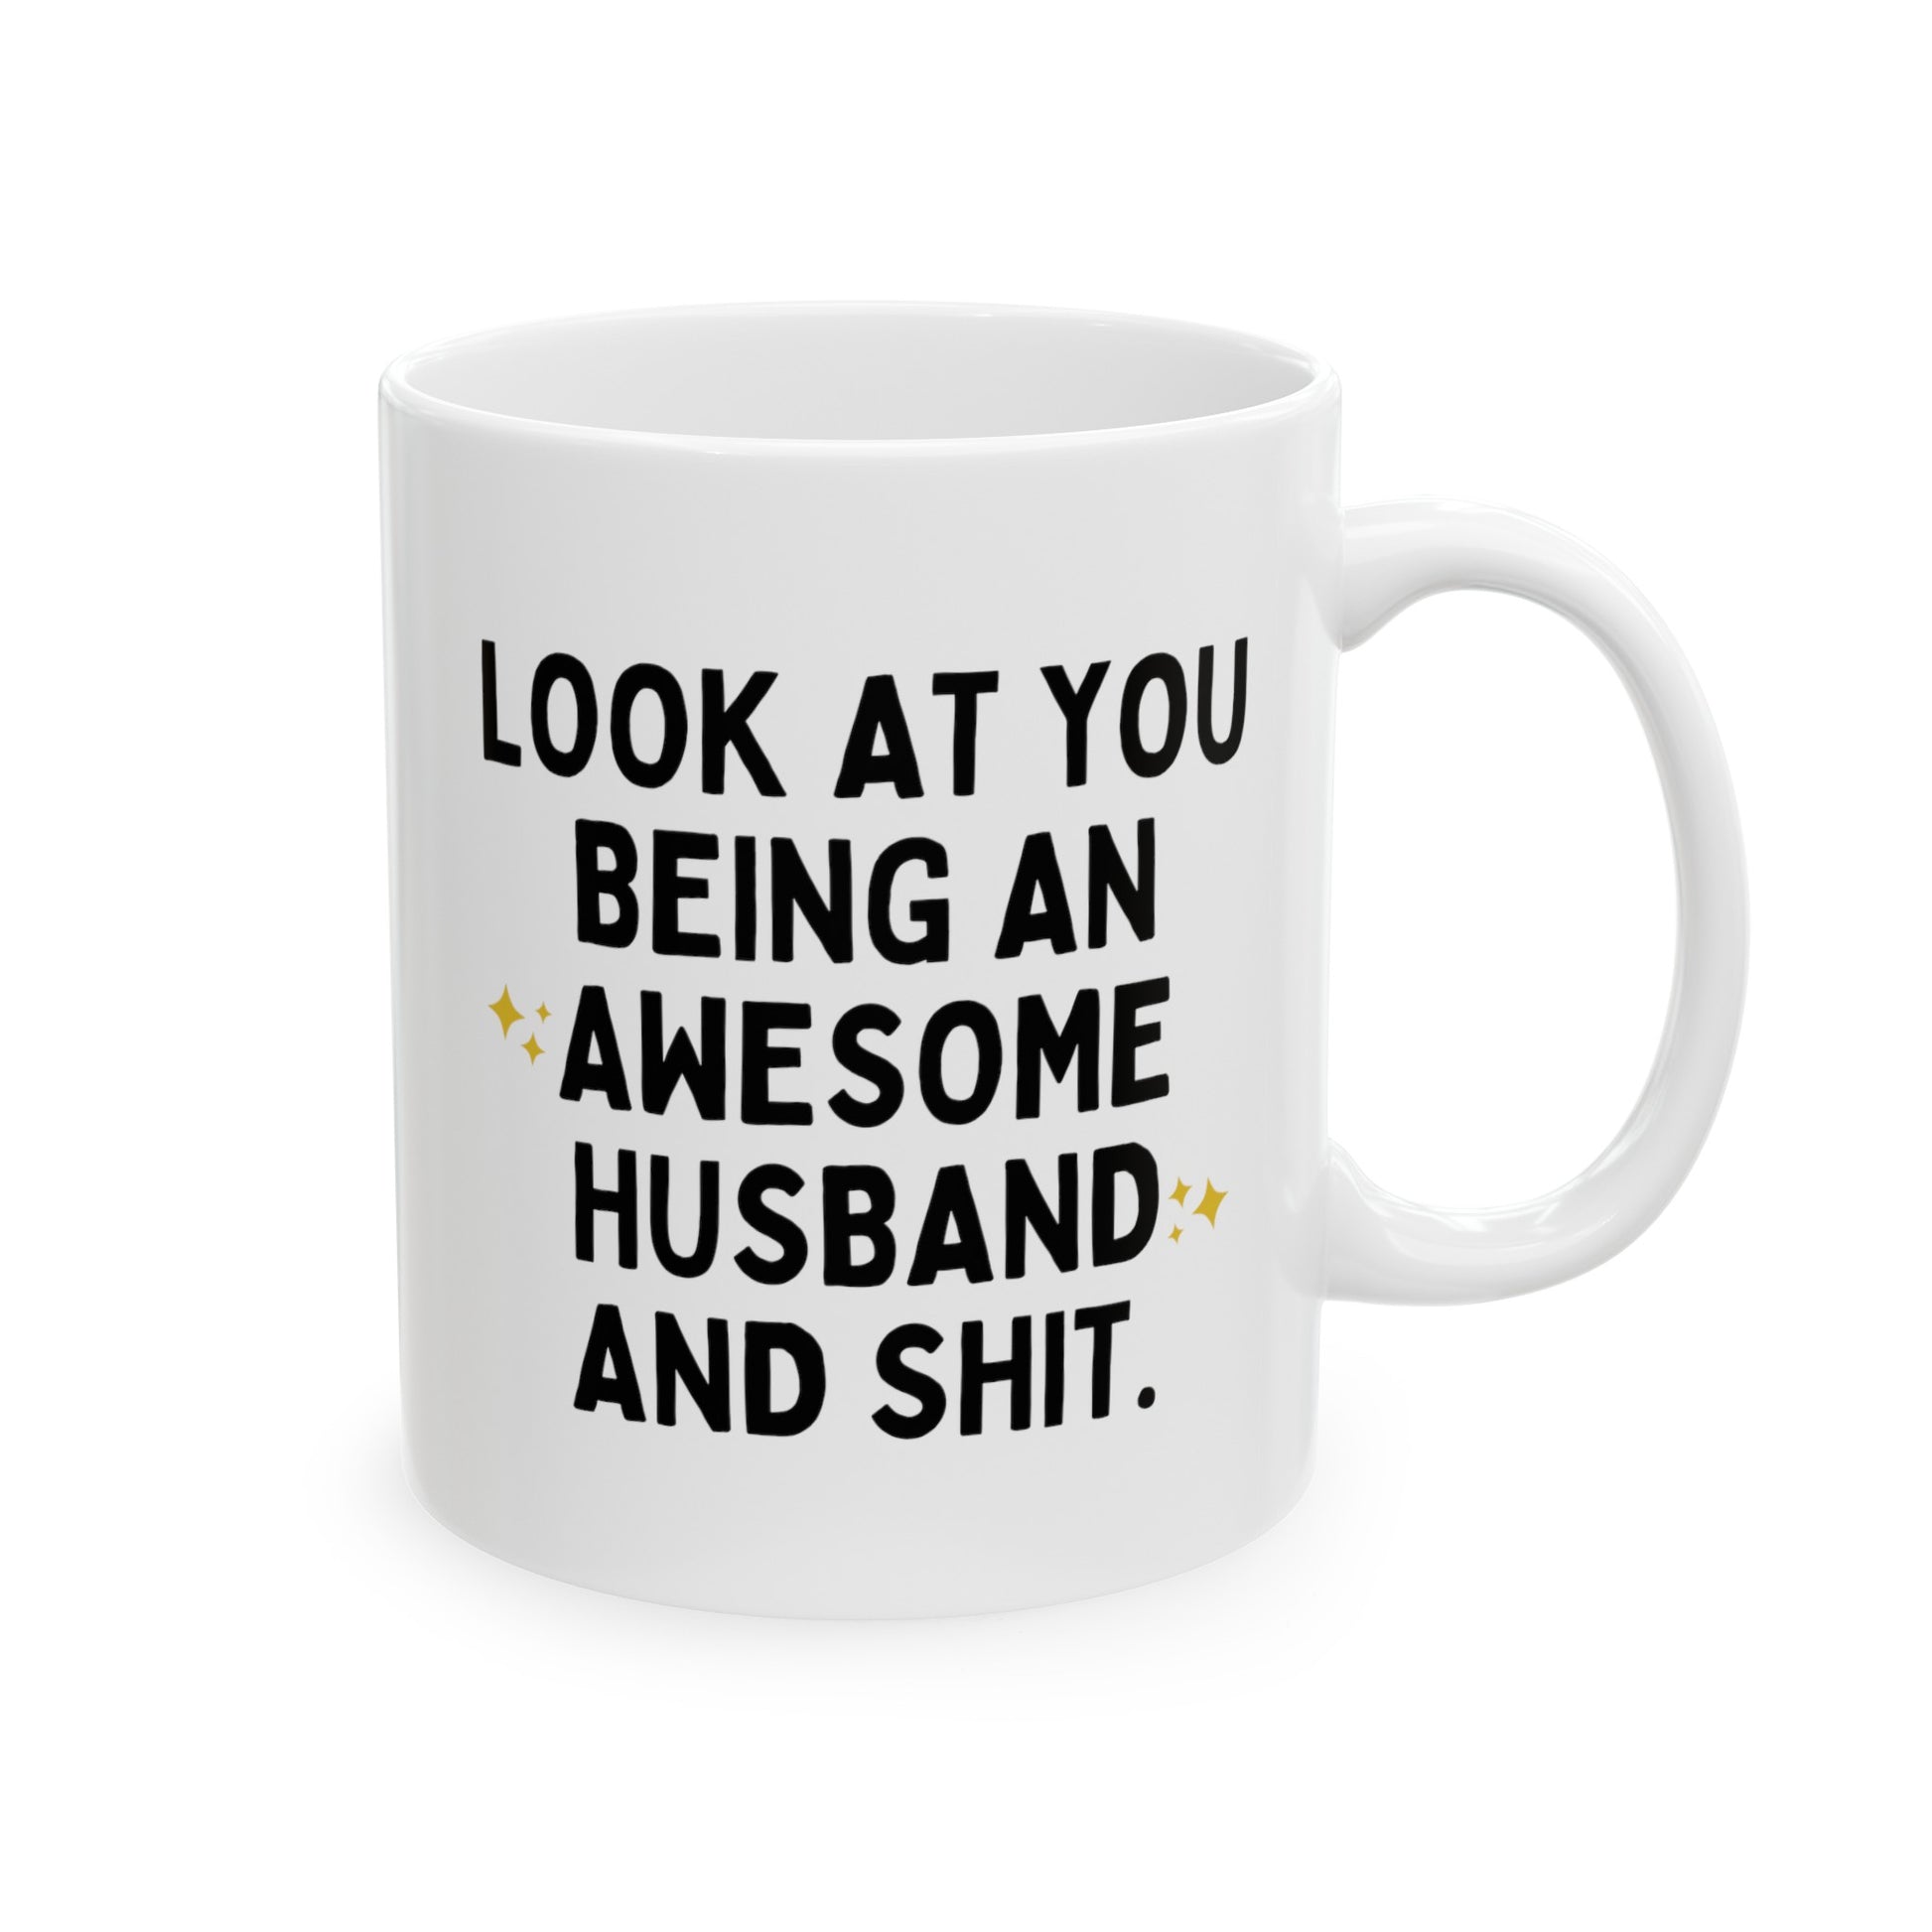 Look At You Being An Awesome Husband And Shit 11oz white funny large coffee mug gift for hubby curse joke gag idea waveywares wavey wares wavywares wavy wares